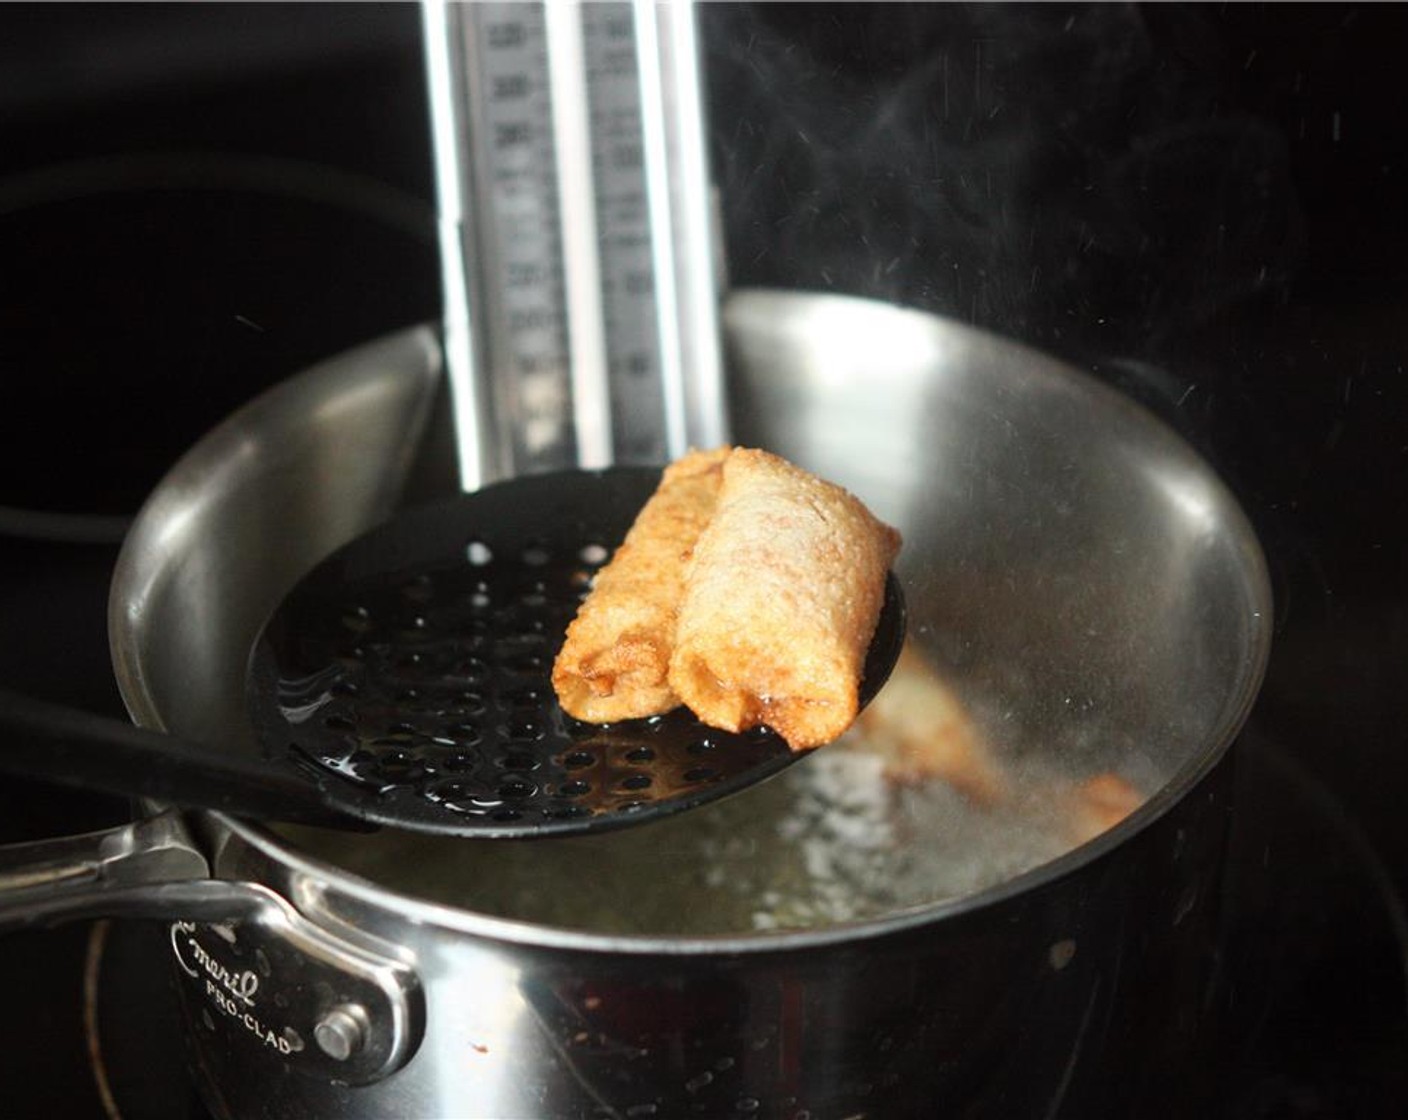 step 8 Working in small batches, add rolls to the oil and fry until golden brown in color. Remove with a slotted spoon to a plate lined with paper towels. Continue with all rolls.